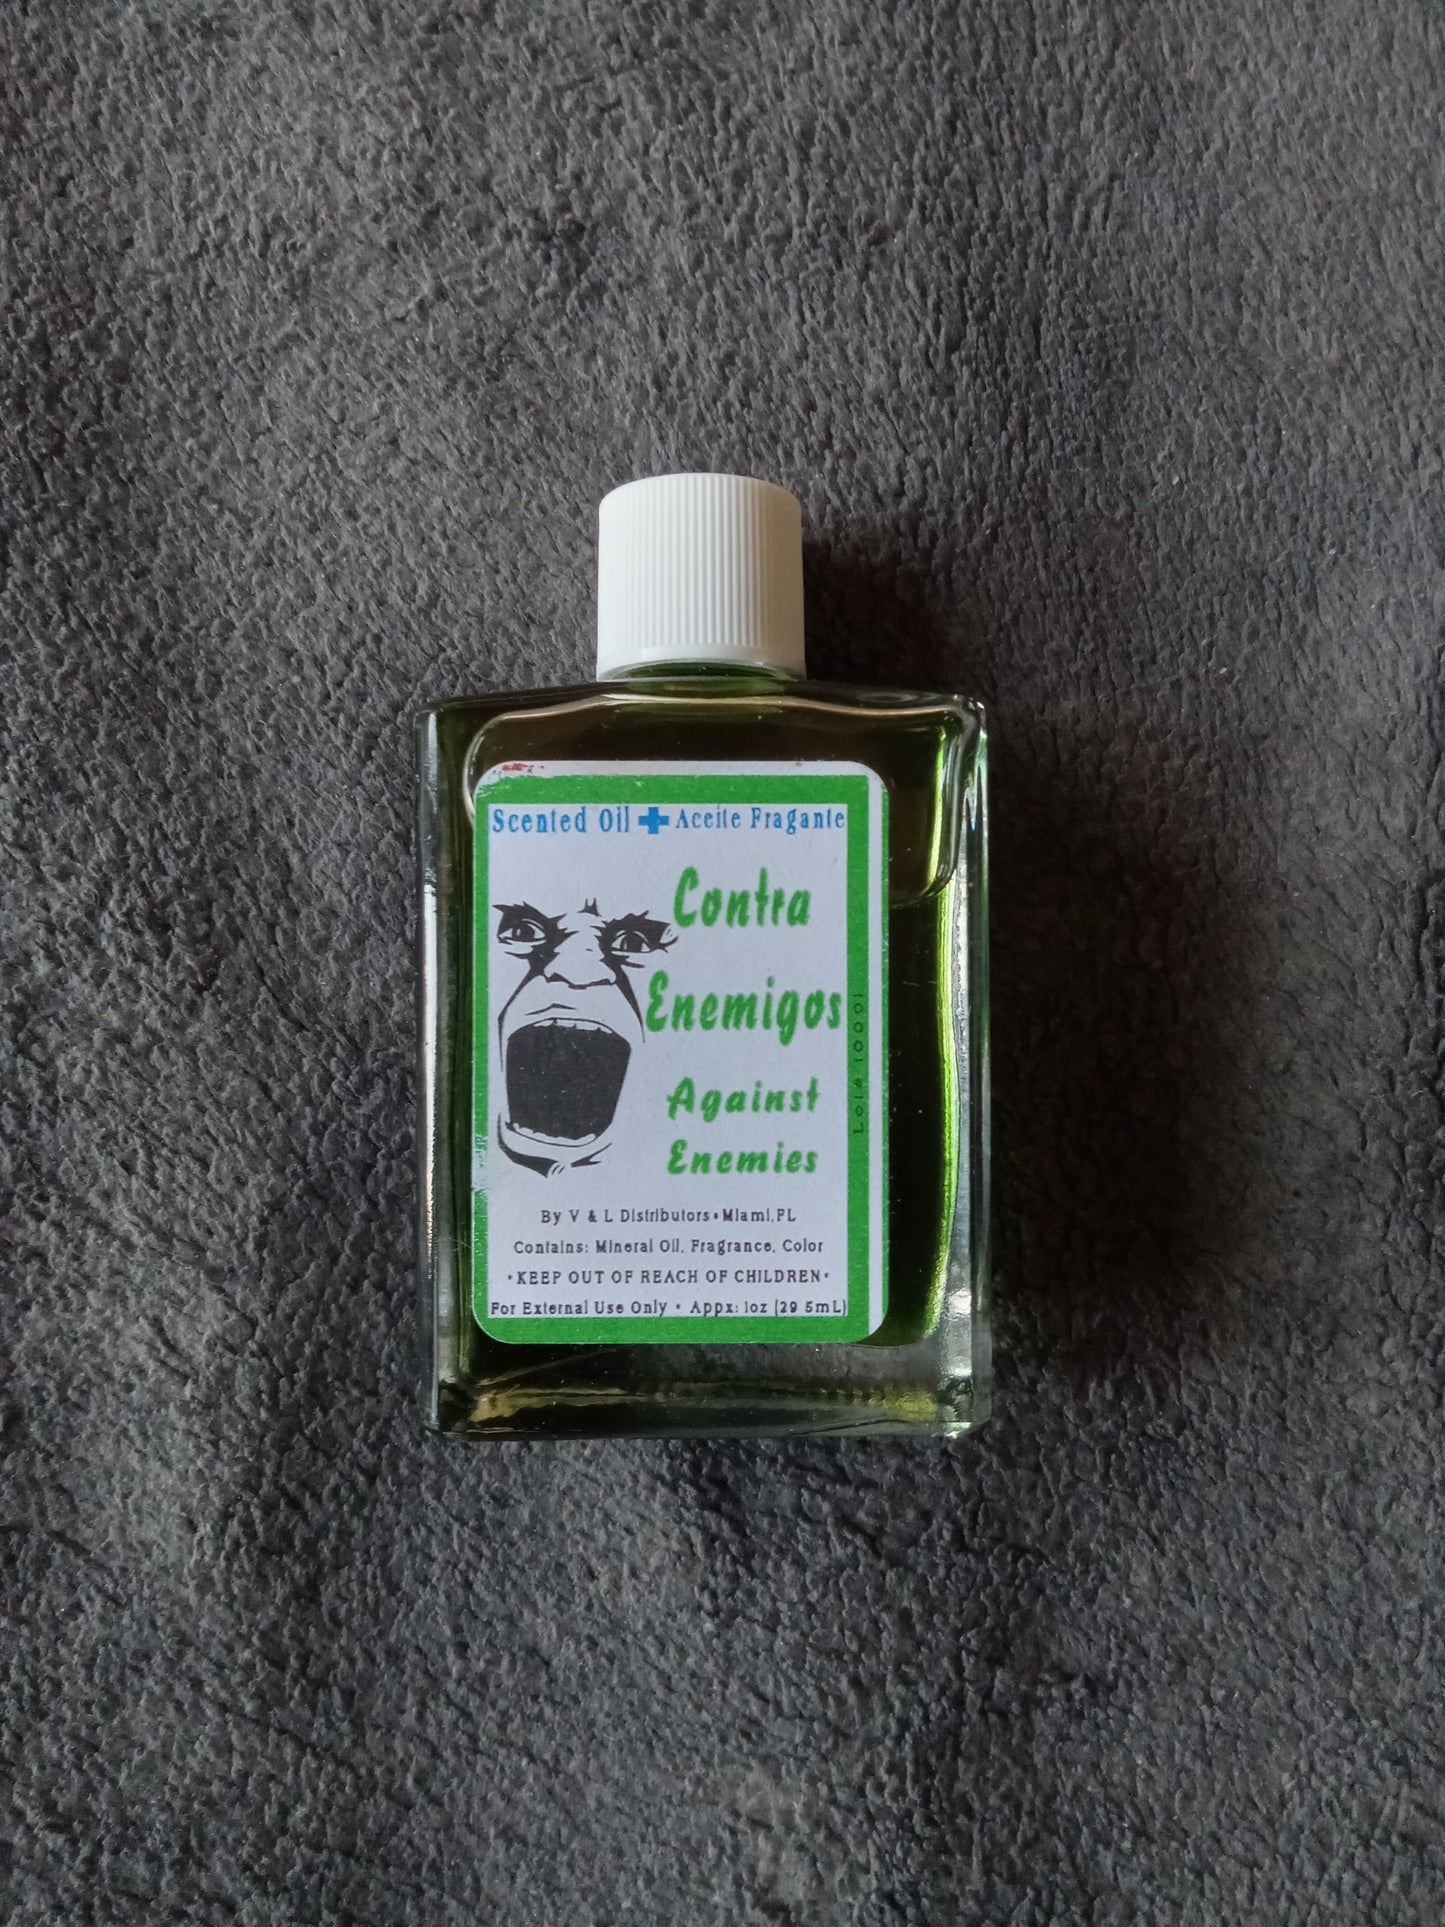  Against Enemies Oil -  available at Amazing Creations Products . Grab yours for $8.95 today!